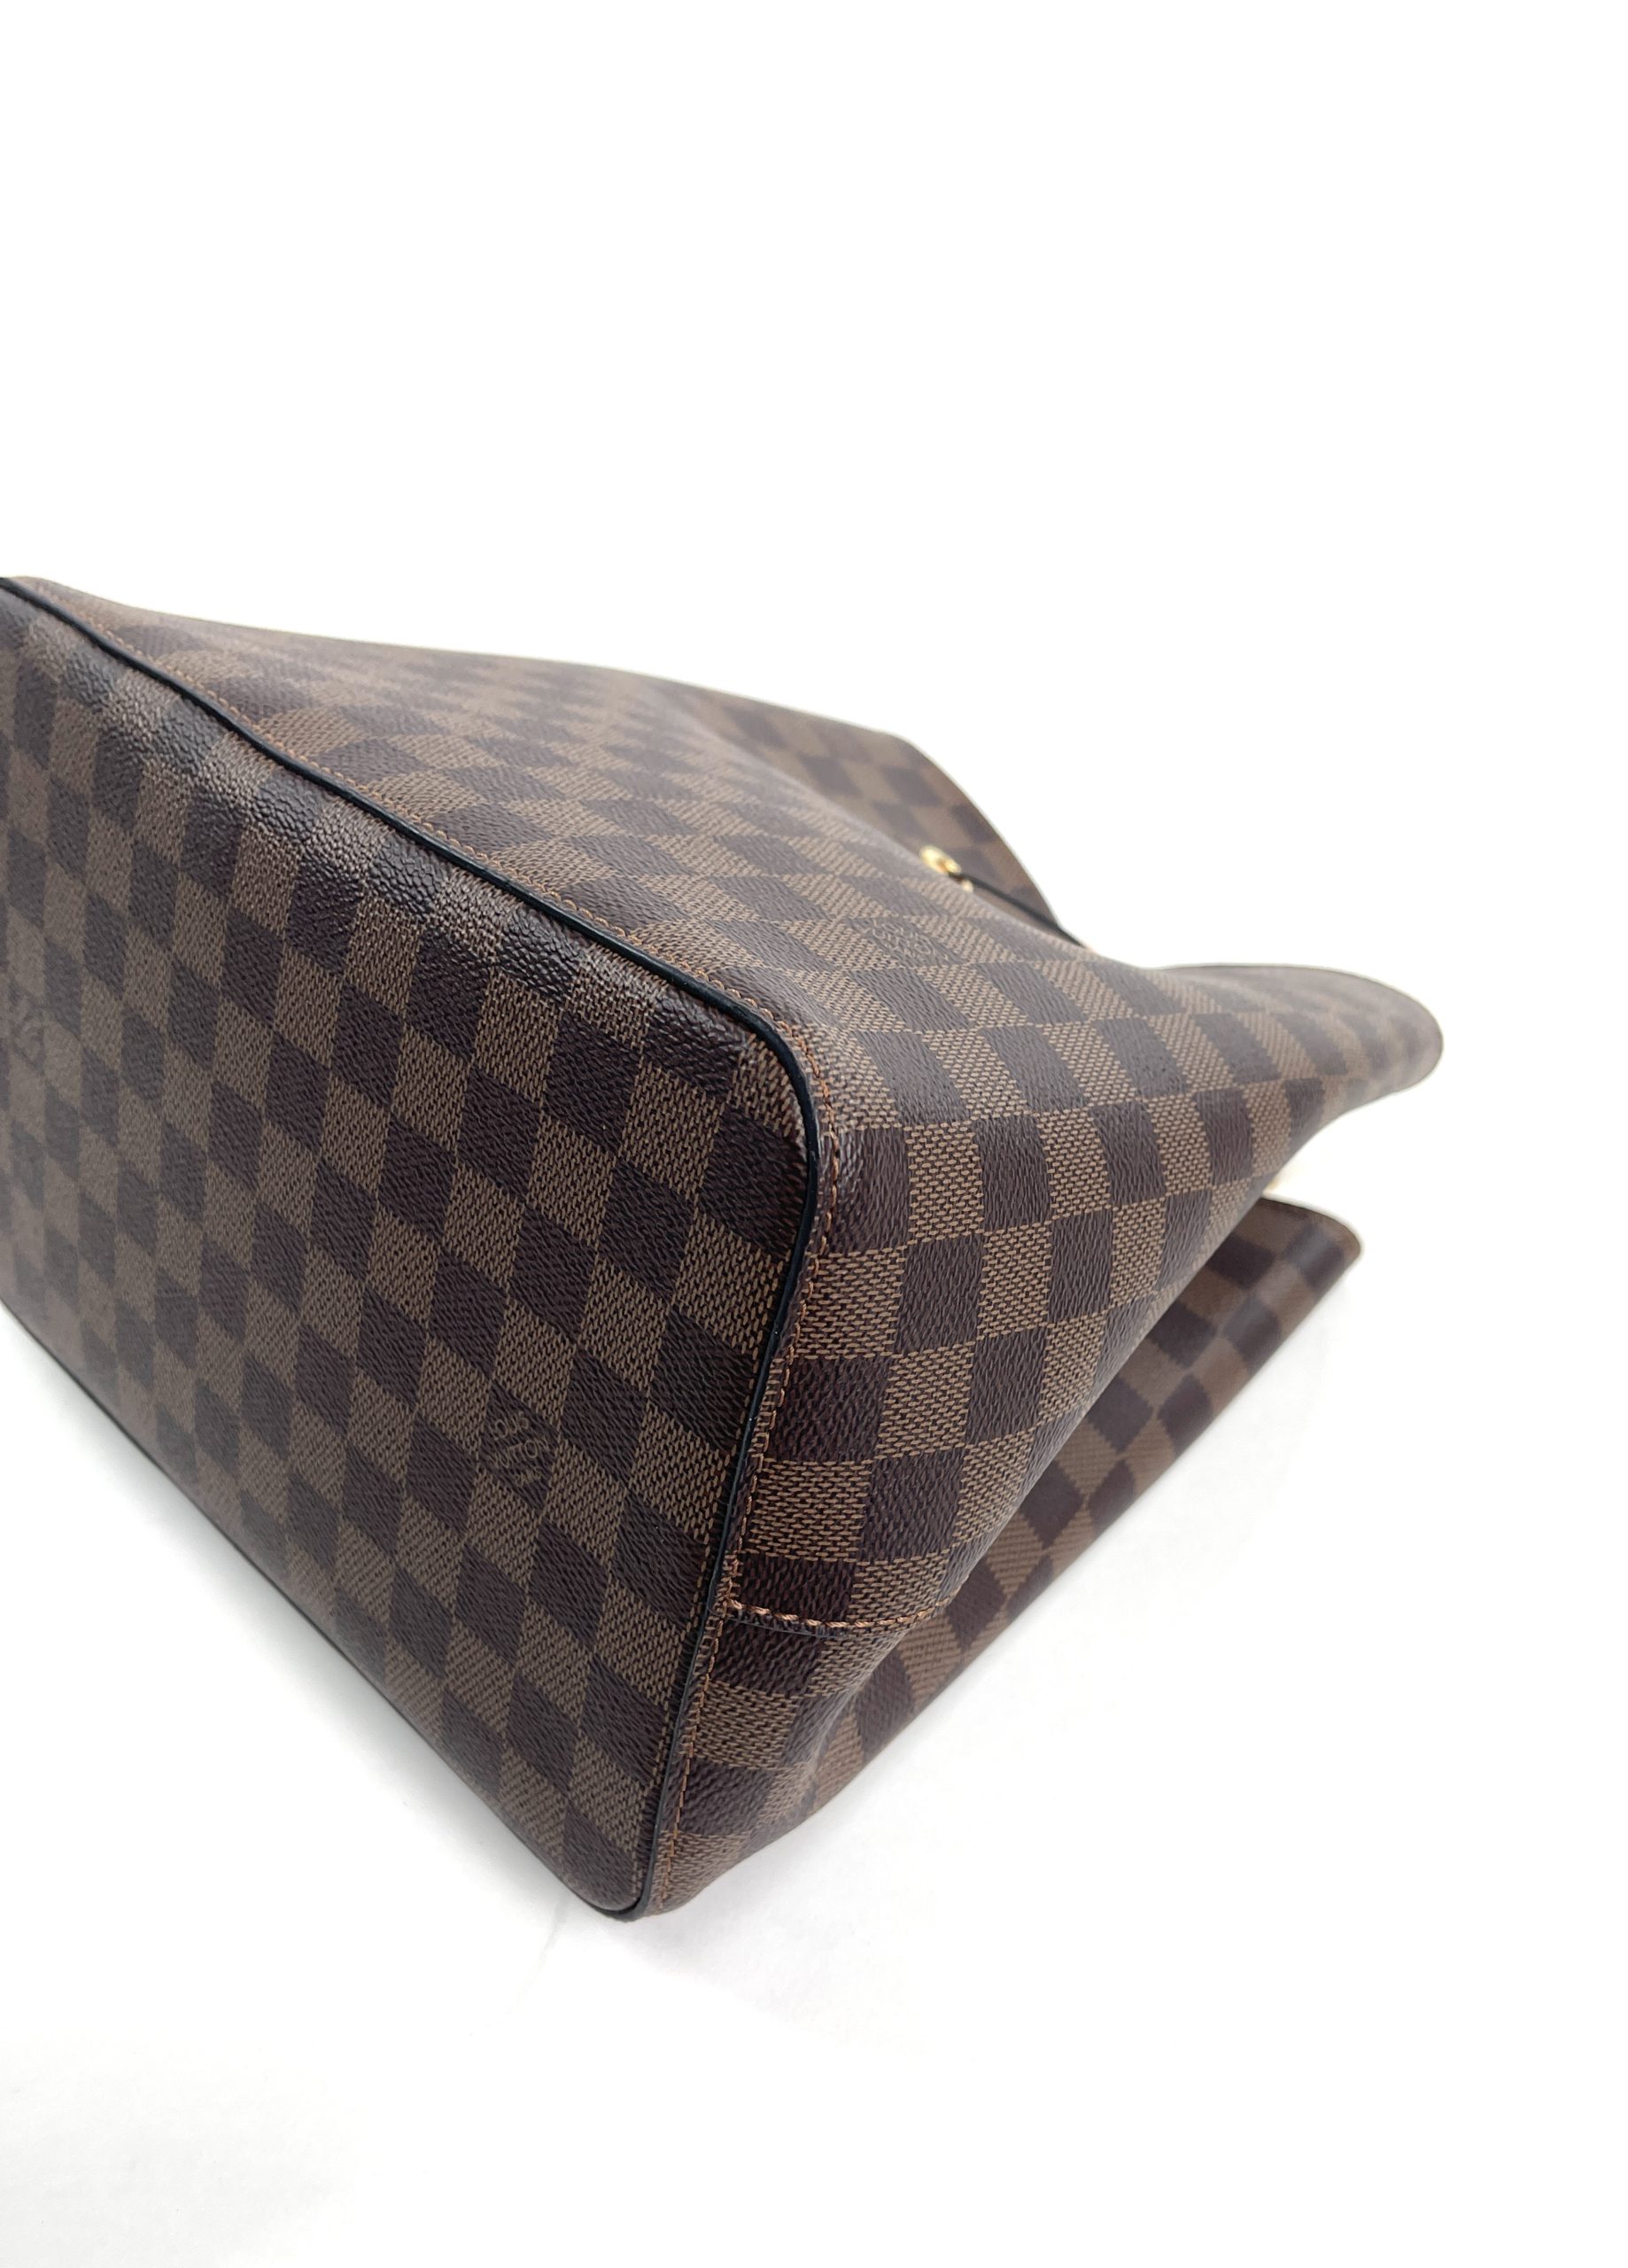 Louis Vuitton - Neo Noe MM - Brown and Red Coated Canvas Monogram Shoulder  Bag